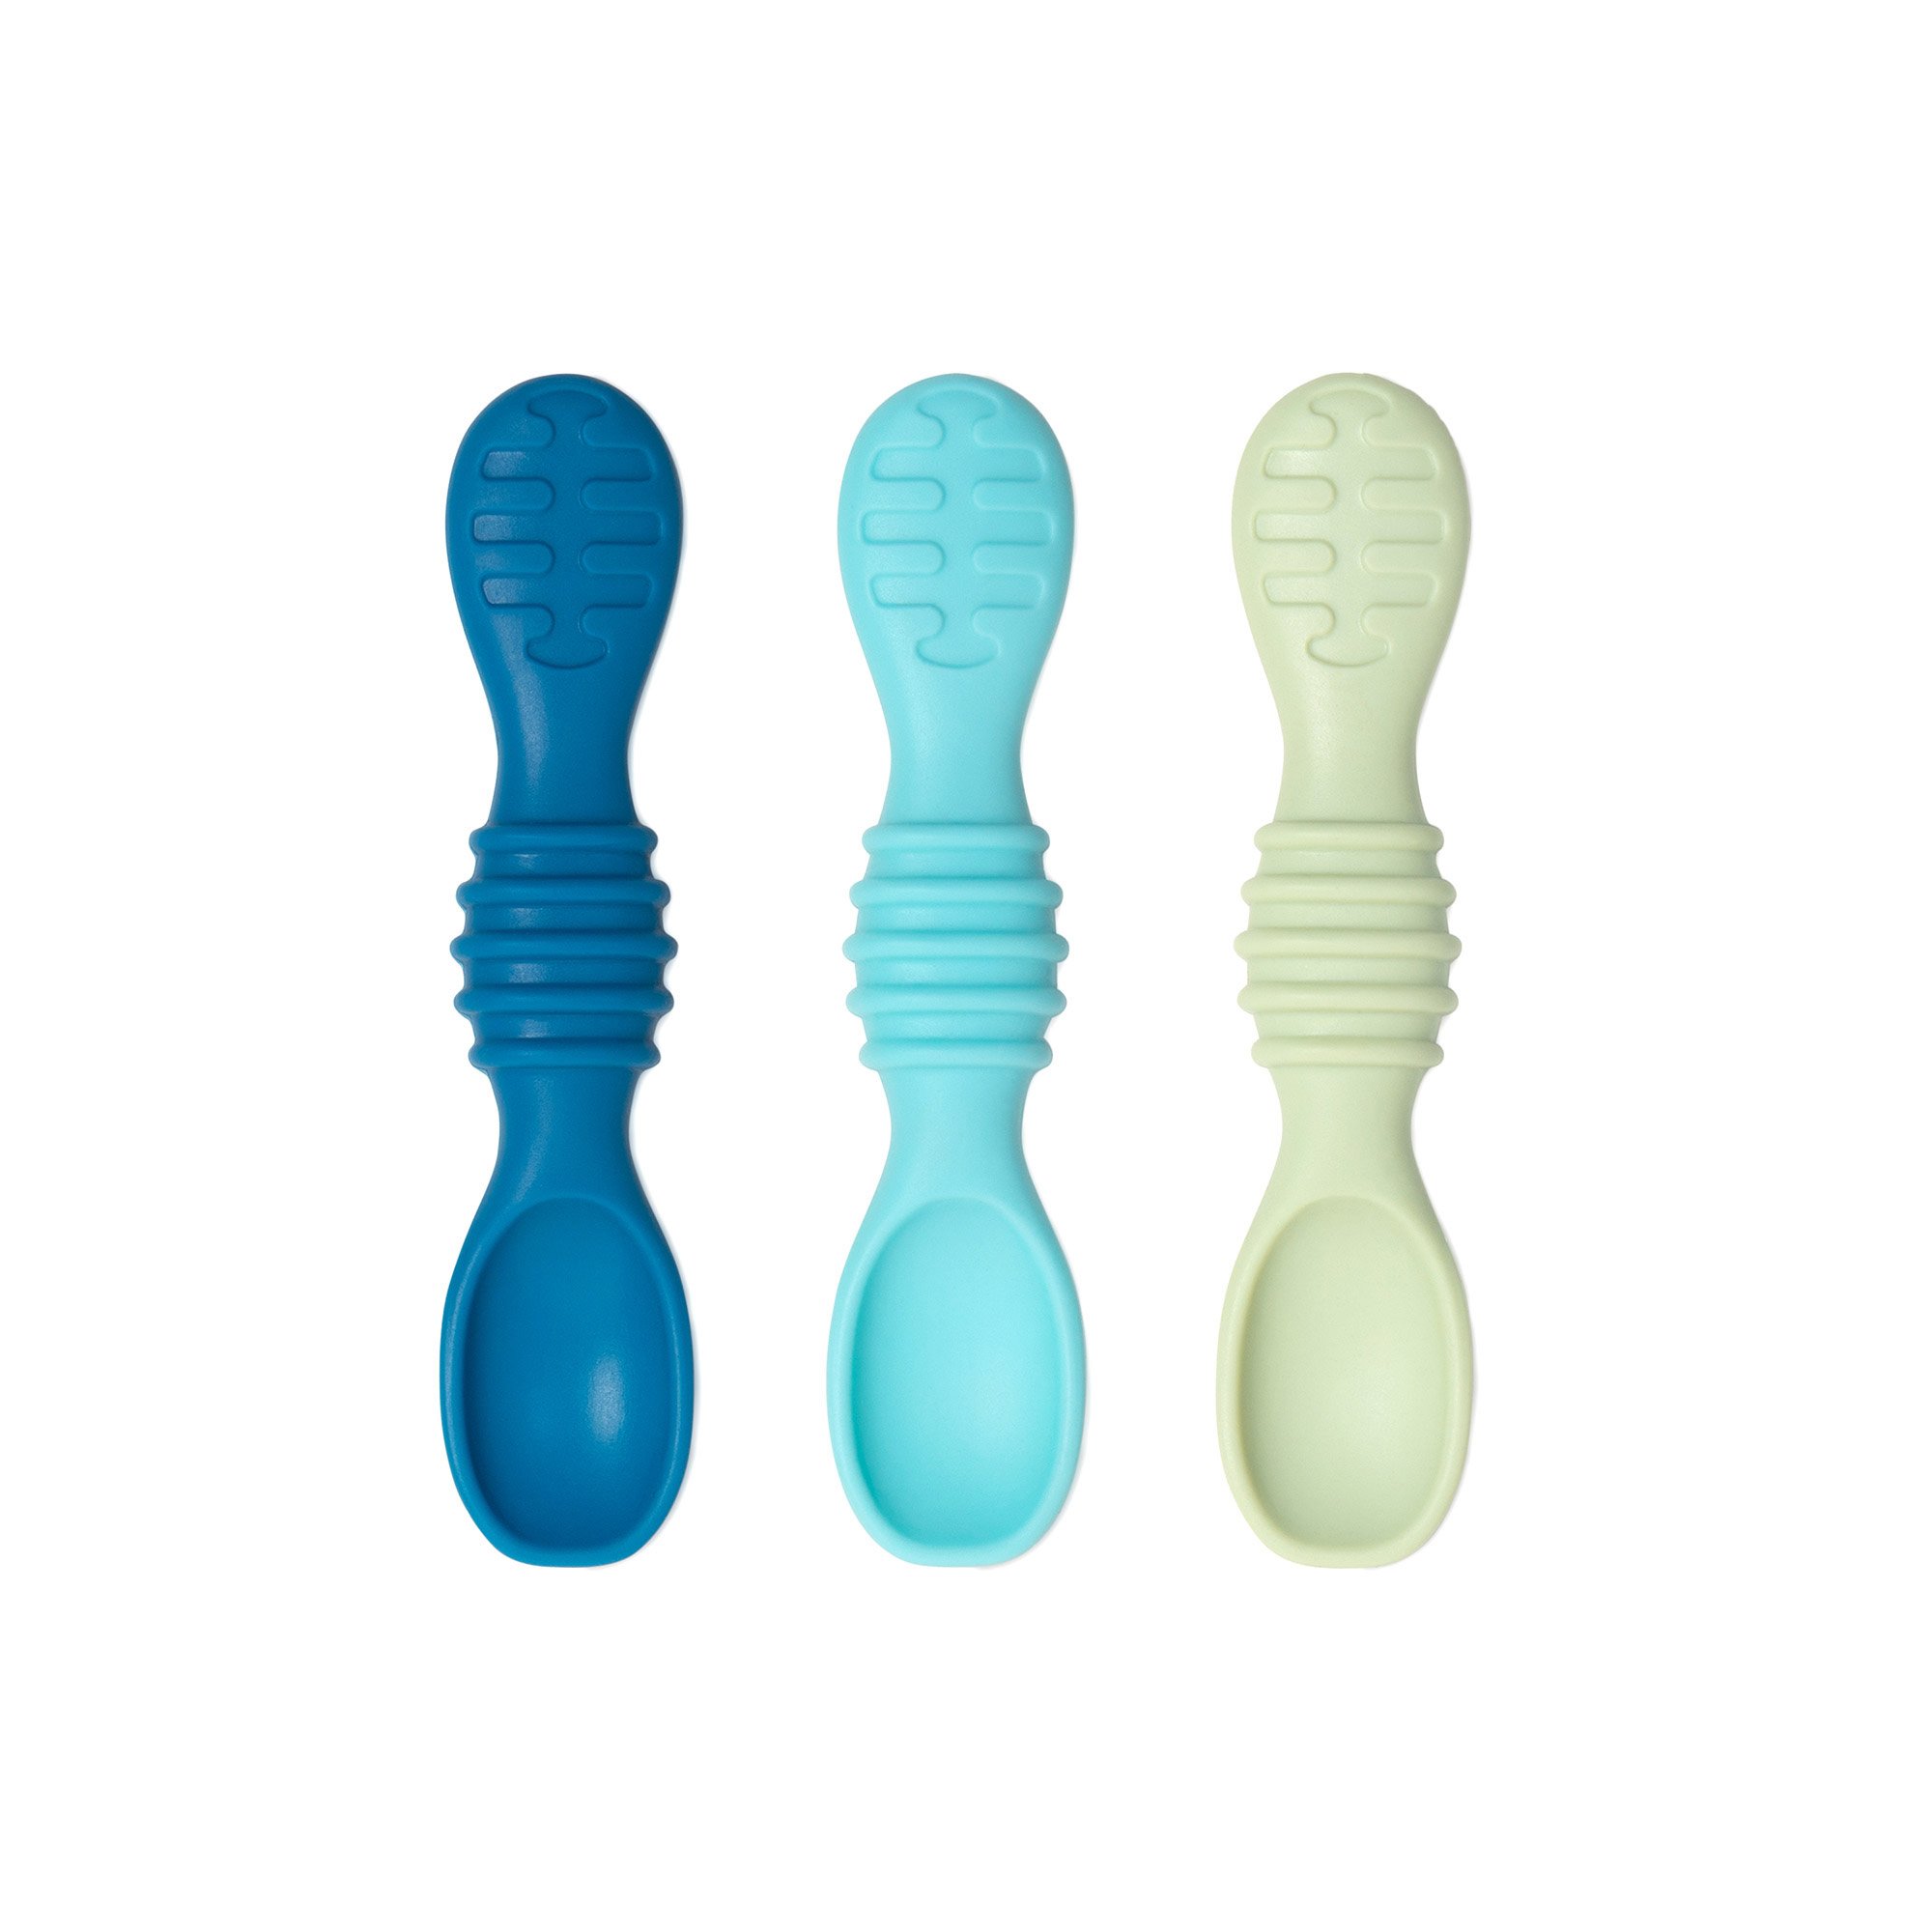  Bumkins Silicone Dipping Spoons  | Gumdrop